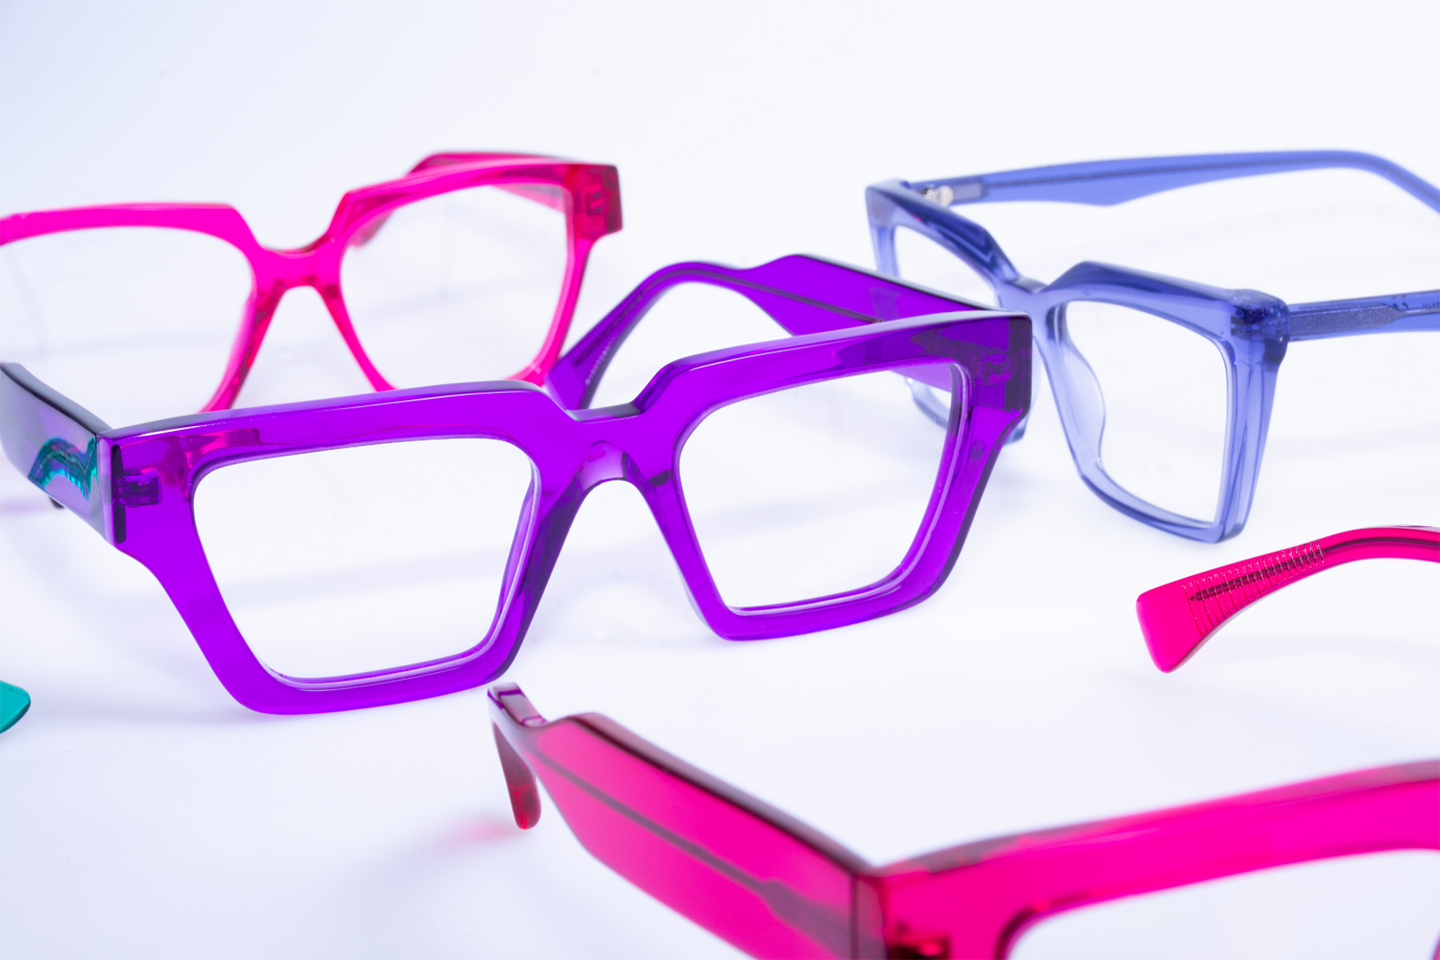 ClearVision Optical announces its latest eyewear collection: ILLA.